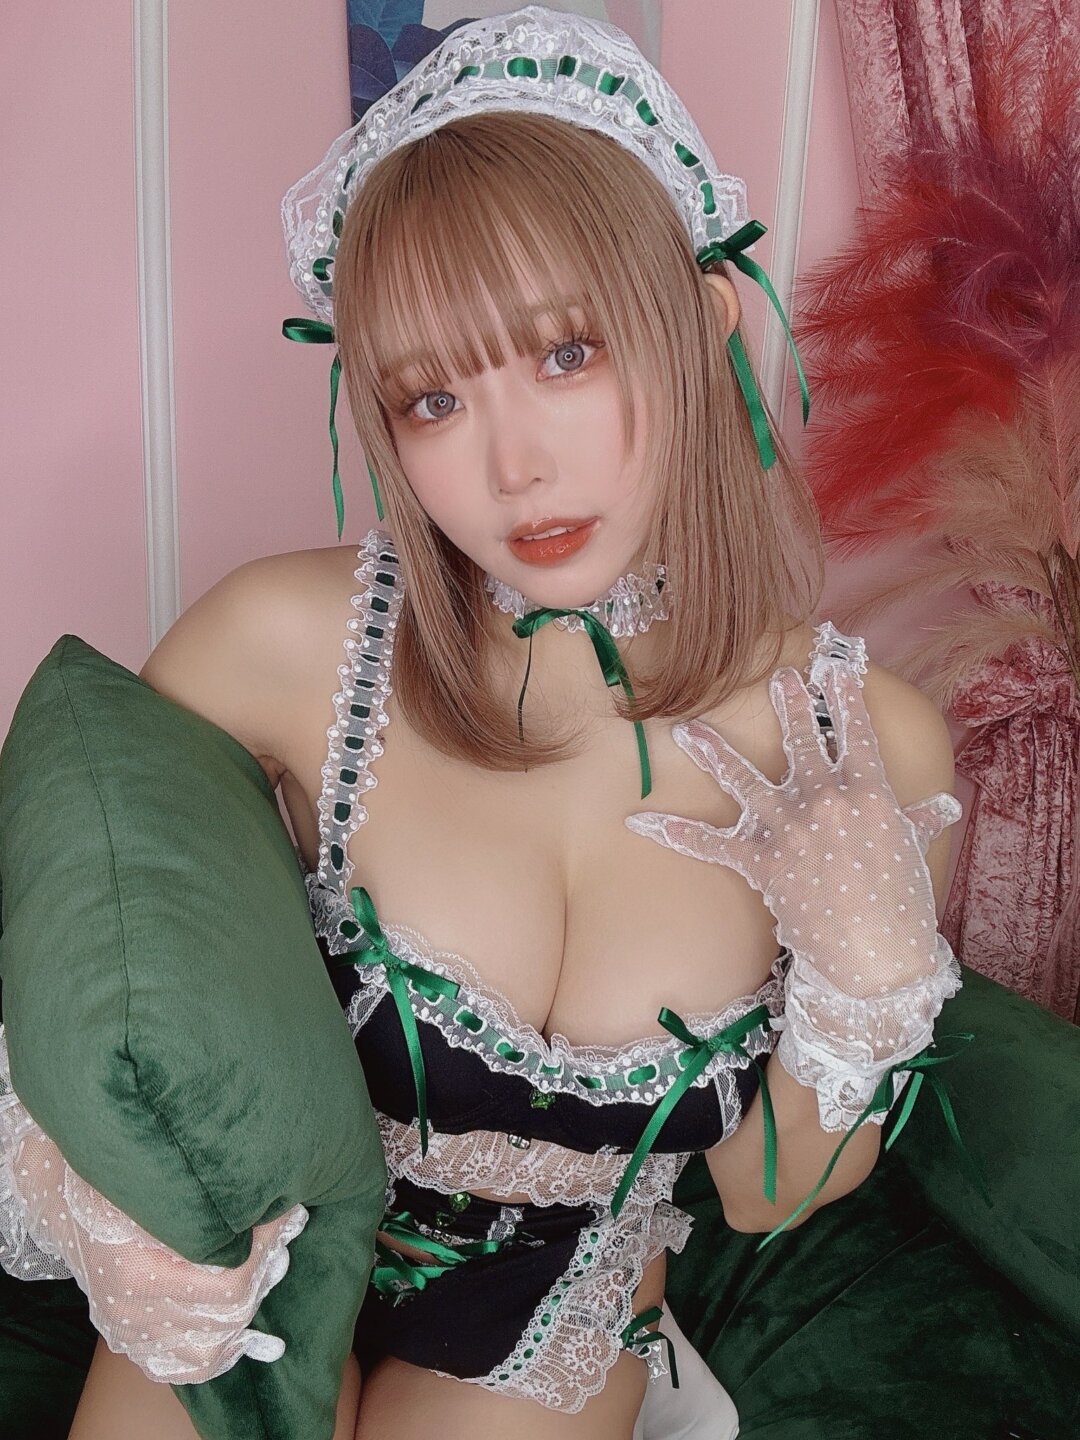 extremely sexy with cosplay photos today 13